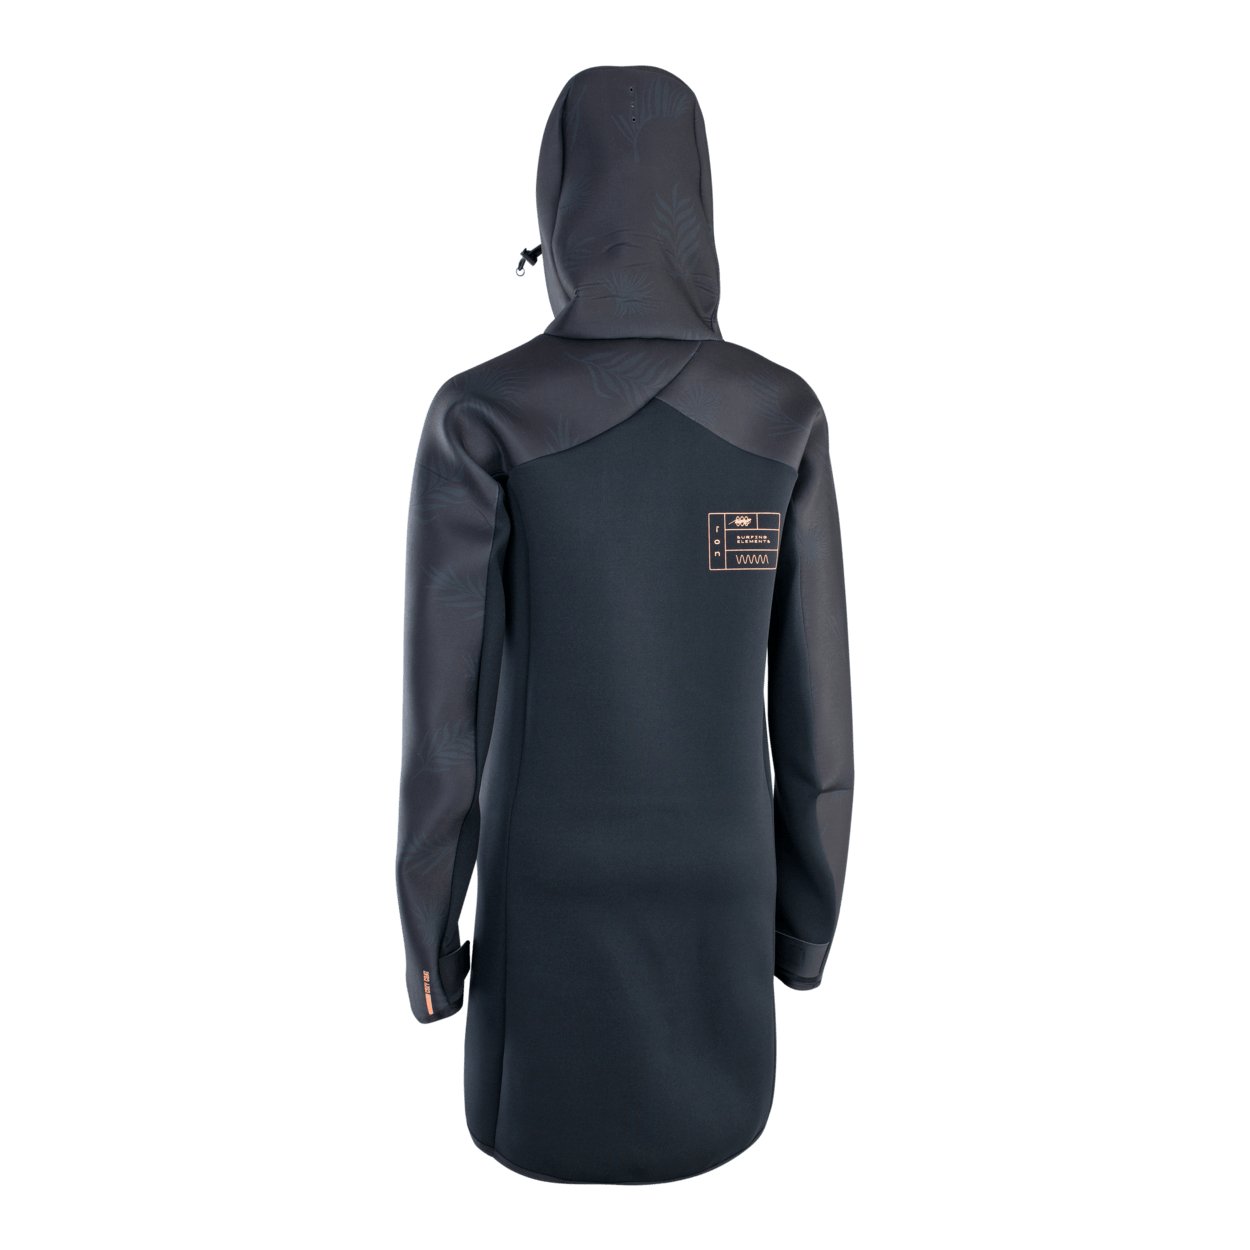 ION Neo Cosy Coat Core women 2022 - Worthing Watersports - 9010583052748 - Tops - ION Water